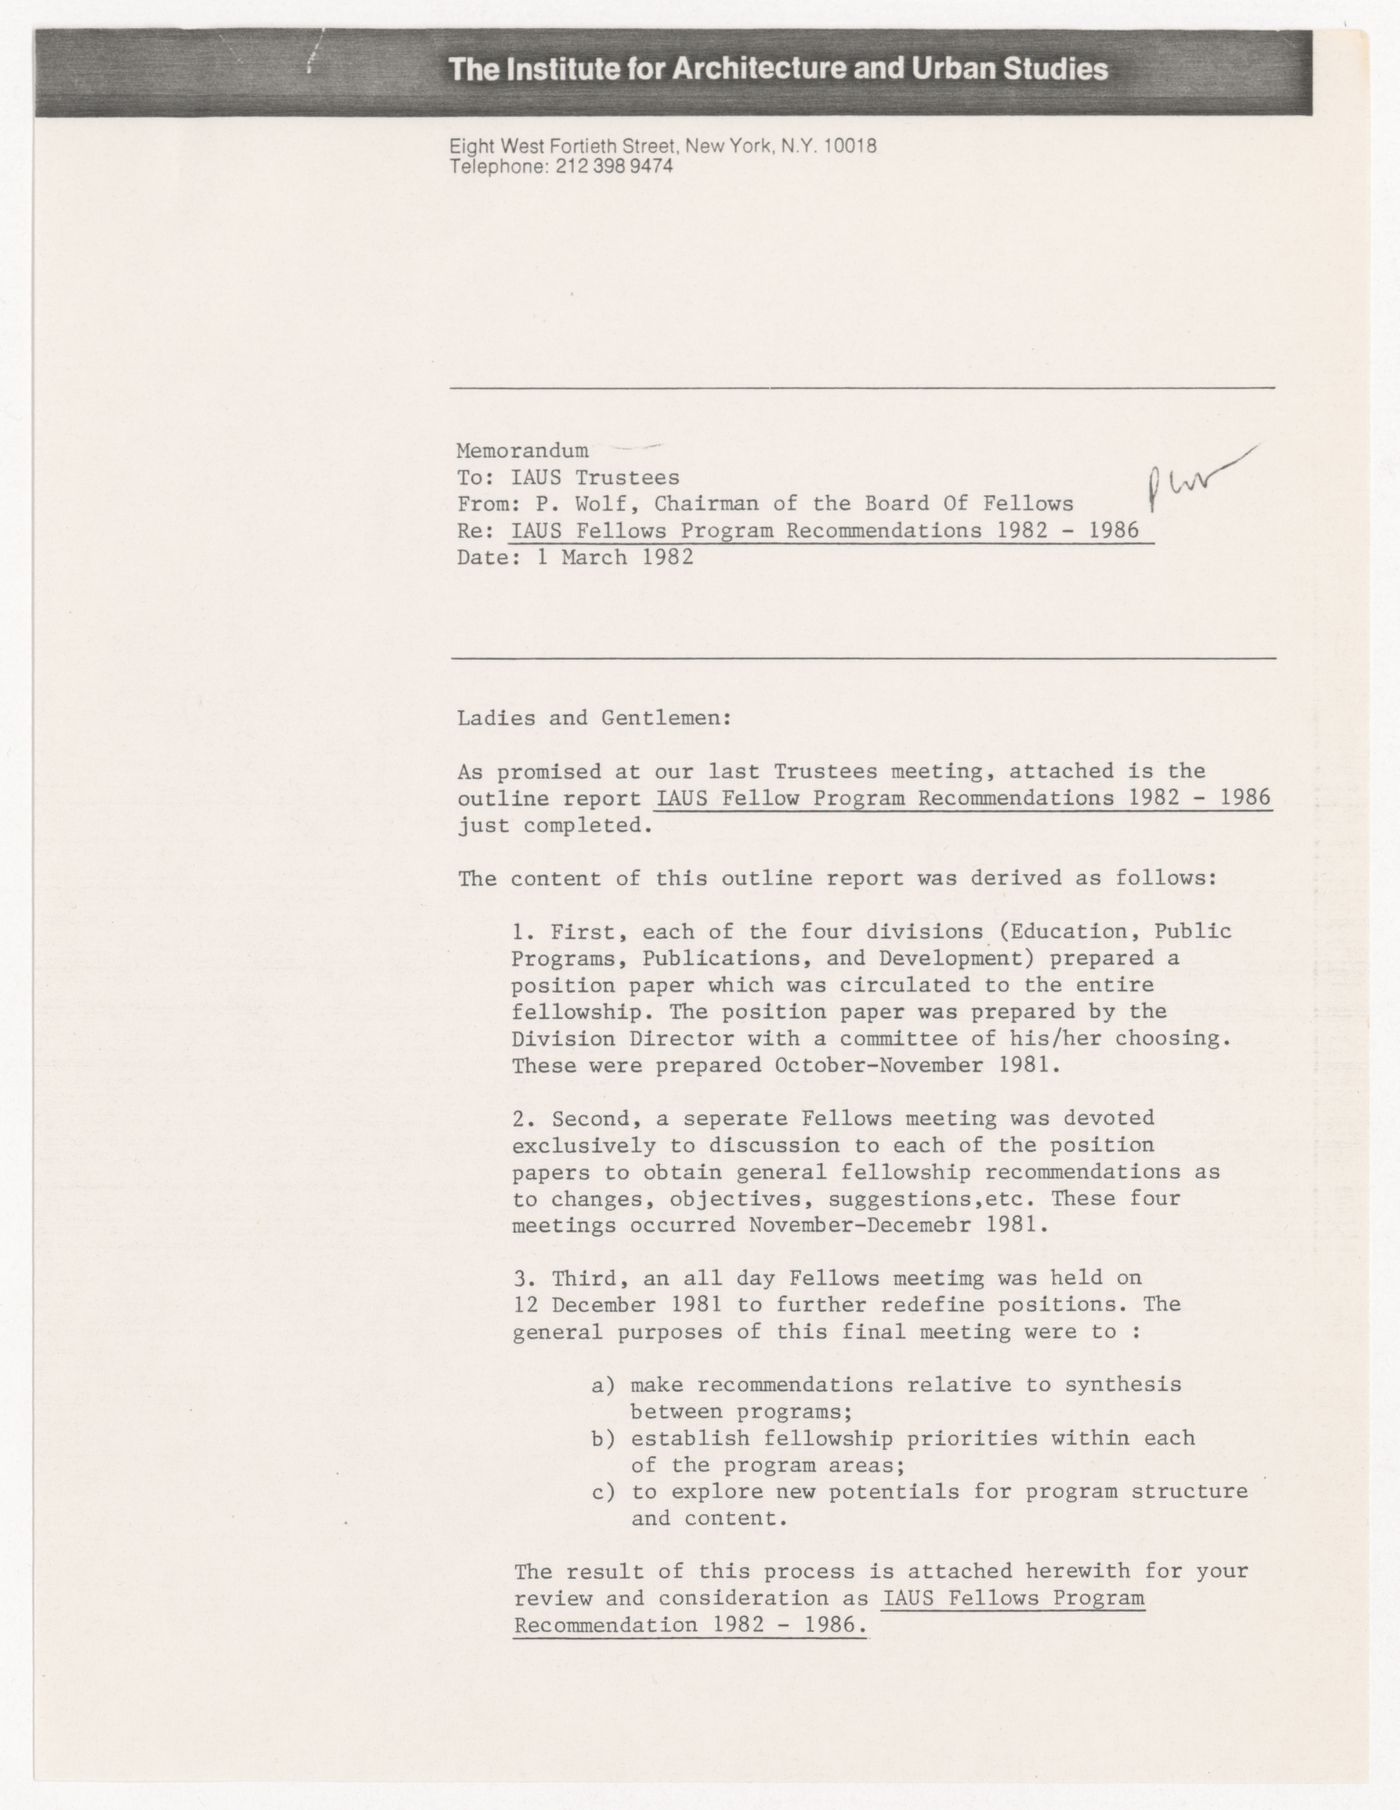 Memorandum from Peter Wolf to IAUS Fellows with attached memorandum from Peter Wolf to IAUS Trustees about IAUS Fellows Program Recommendations for 1982-1986